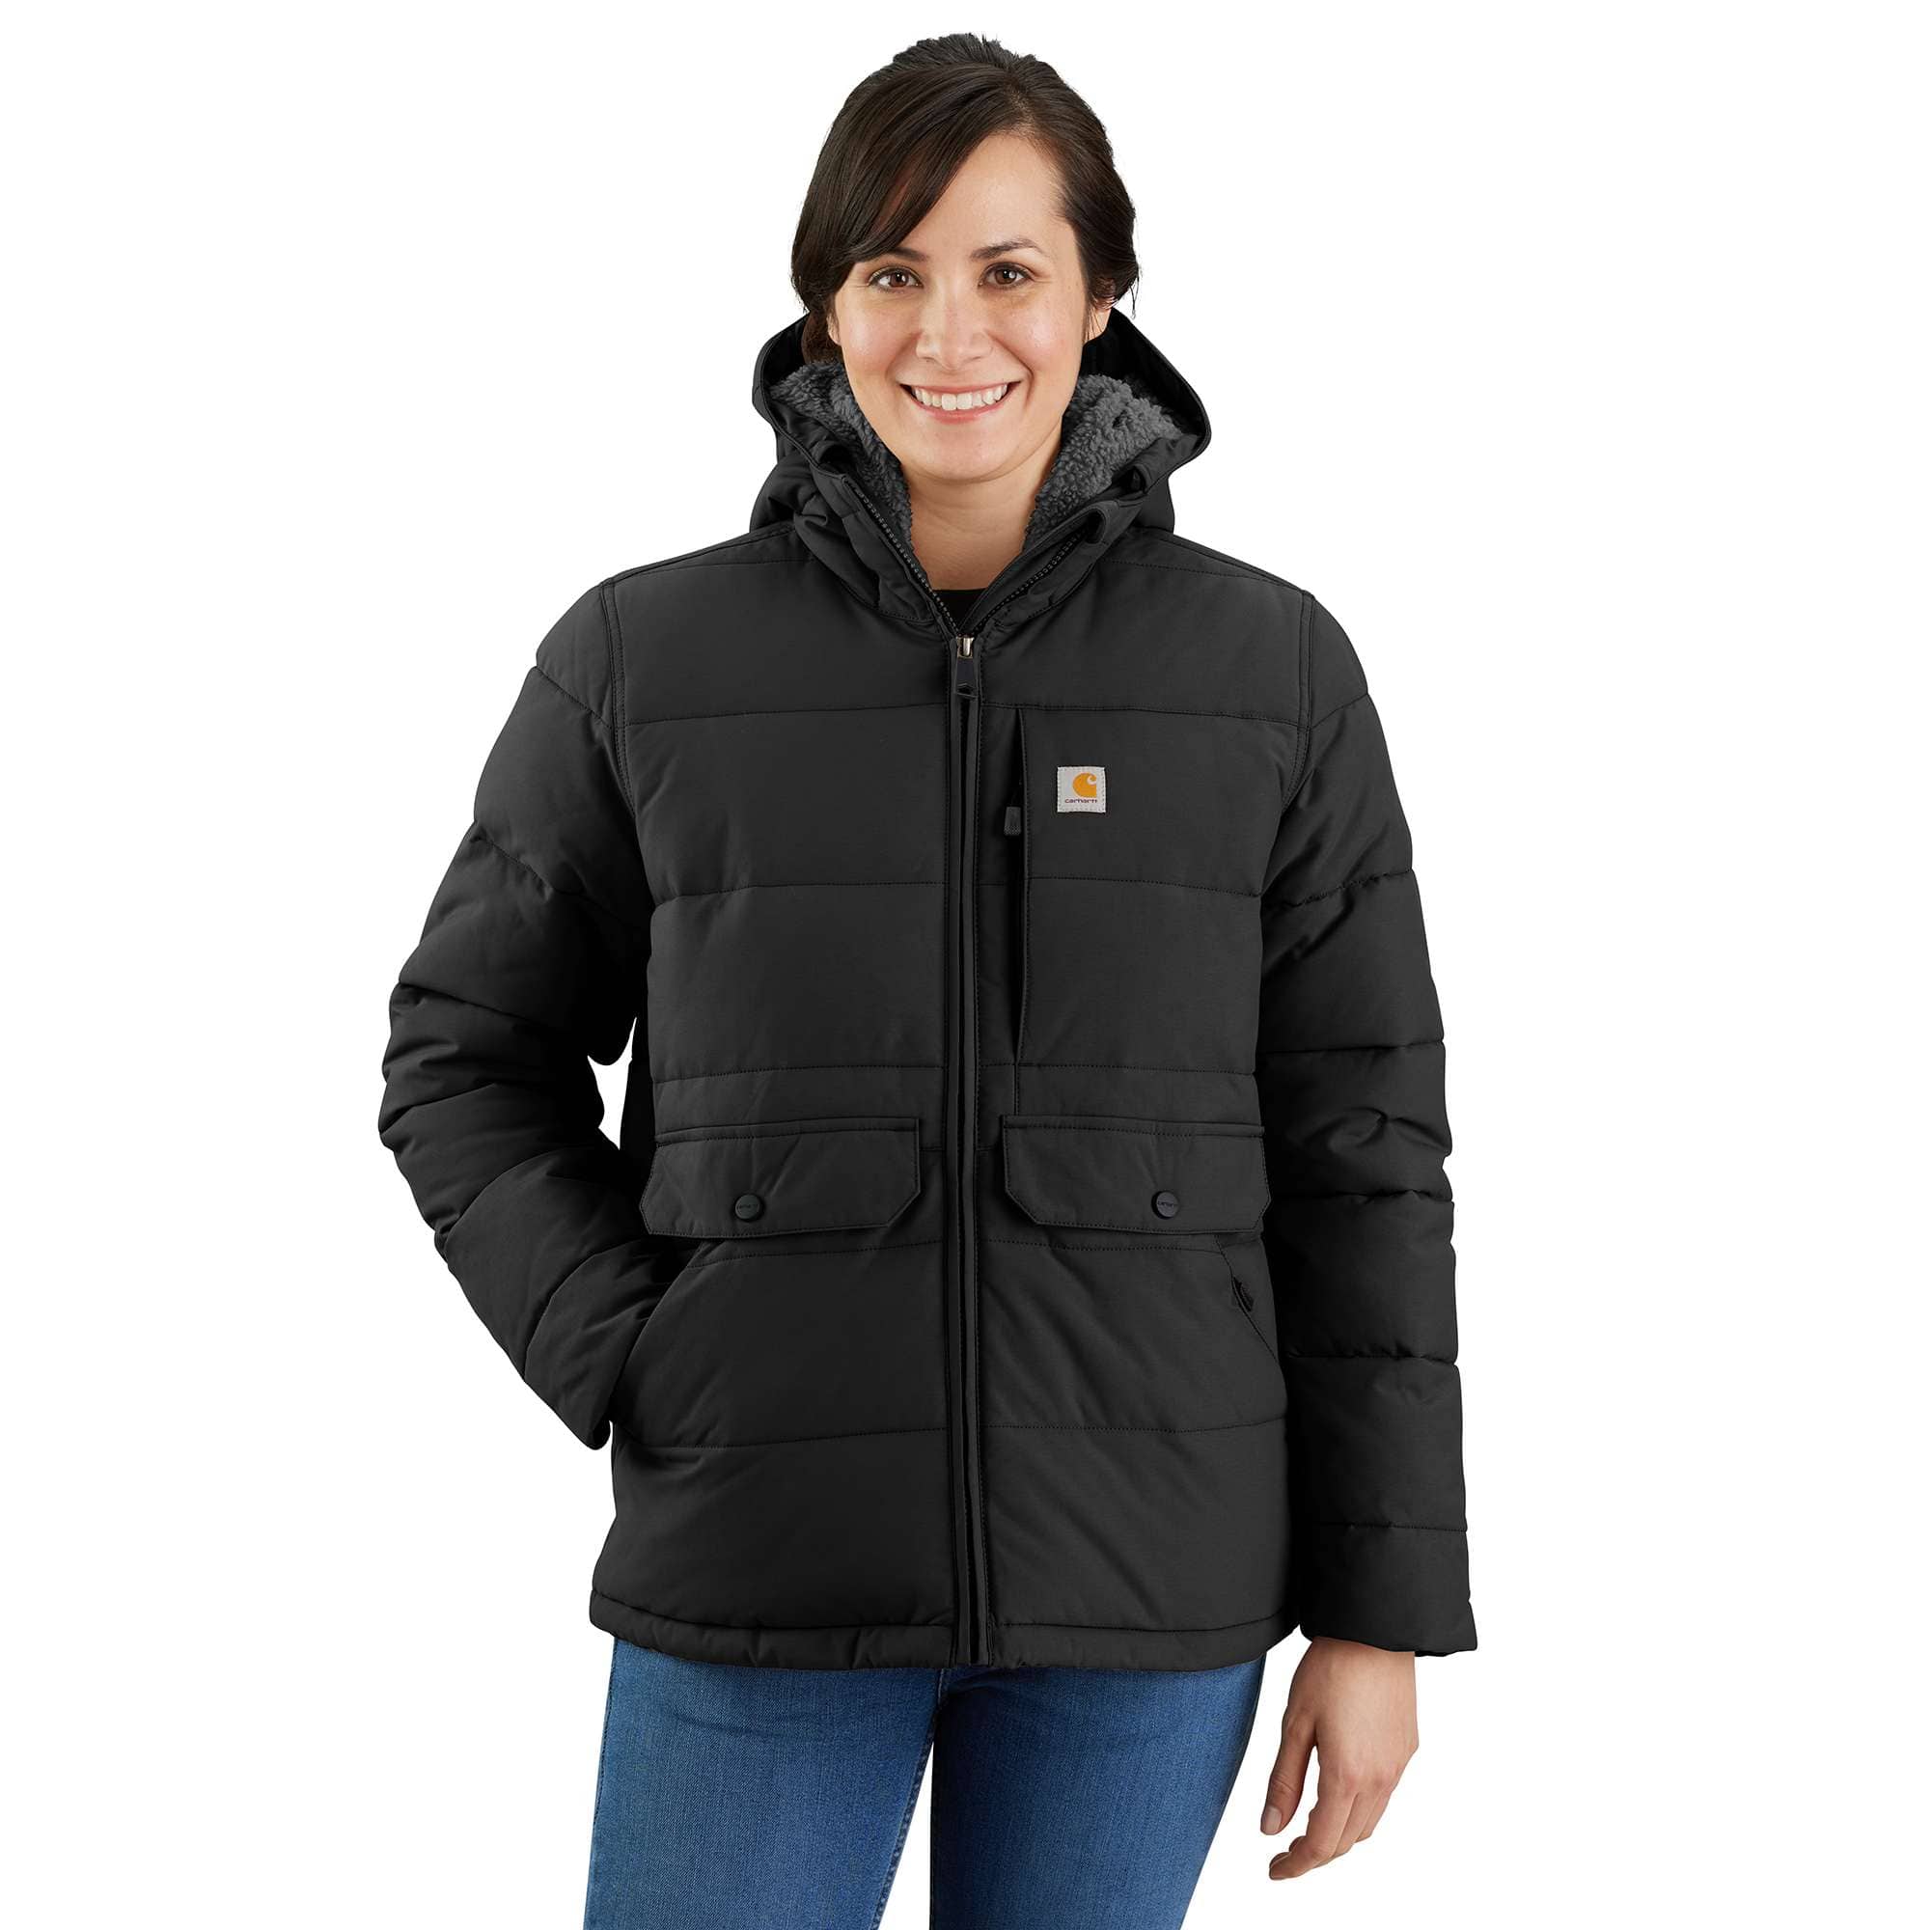 Montana Women's Puffer Jacket - Sherpa Lined 4 Extreme Warmth Rating